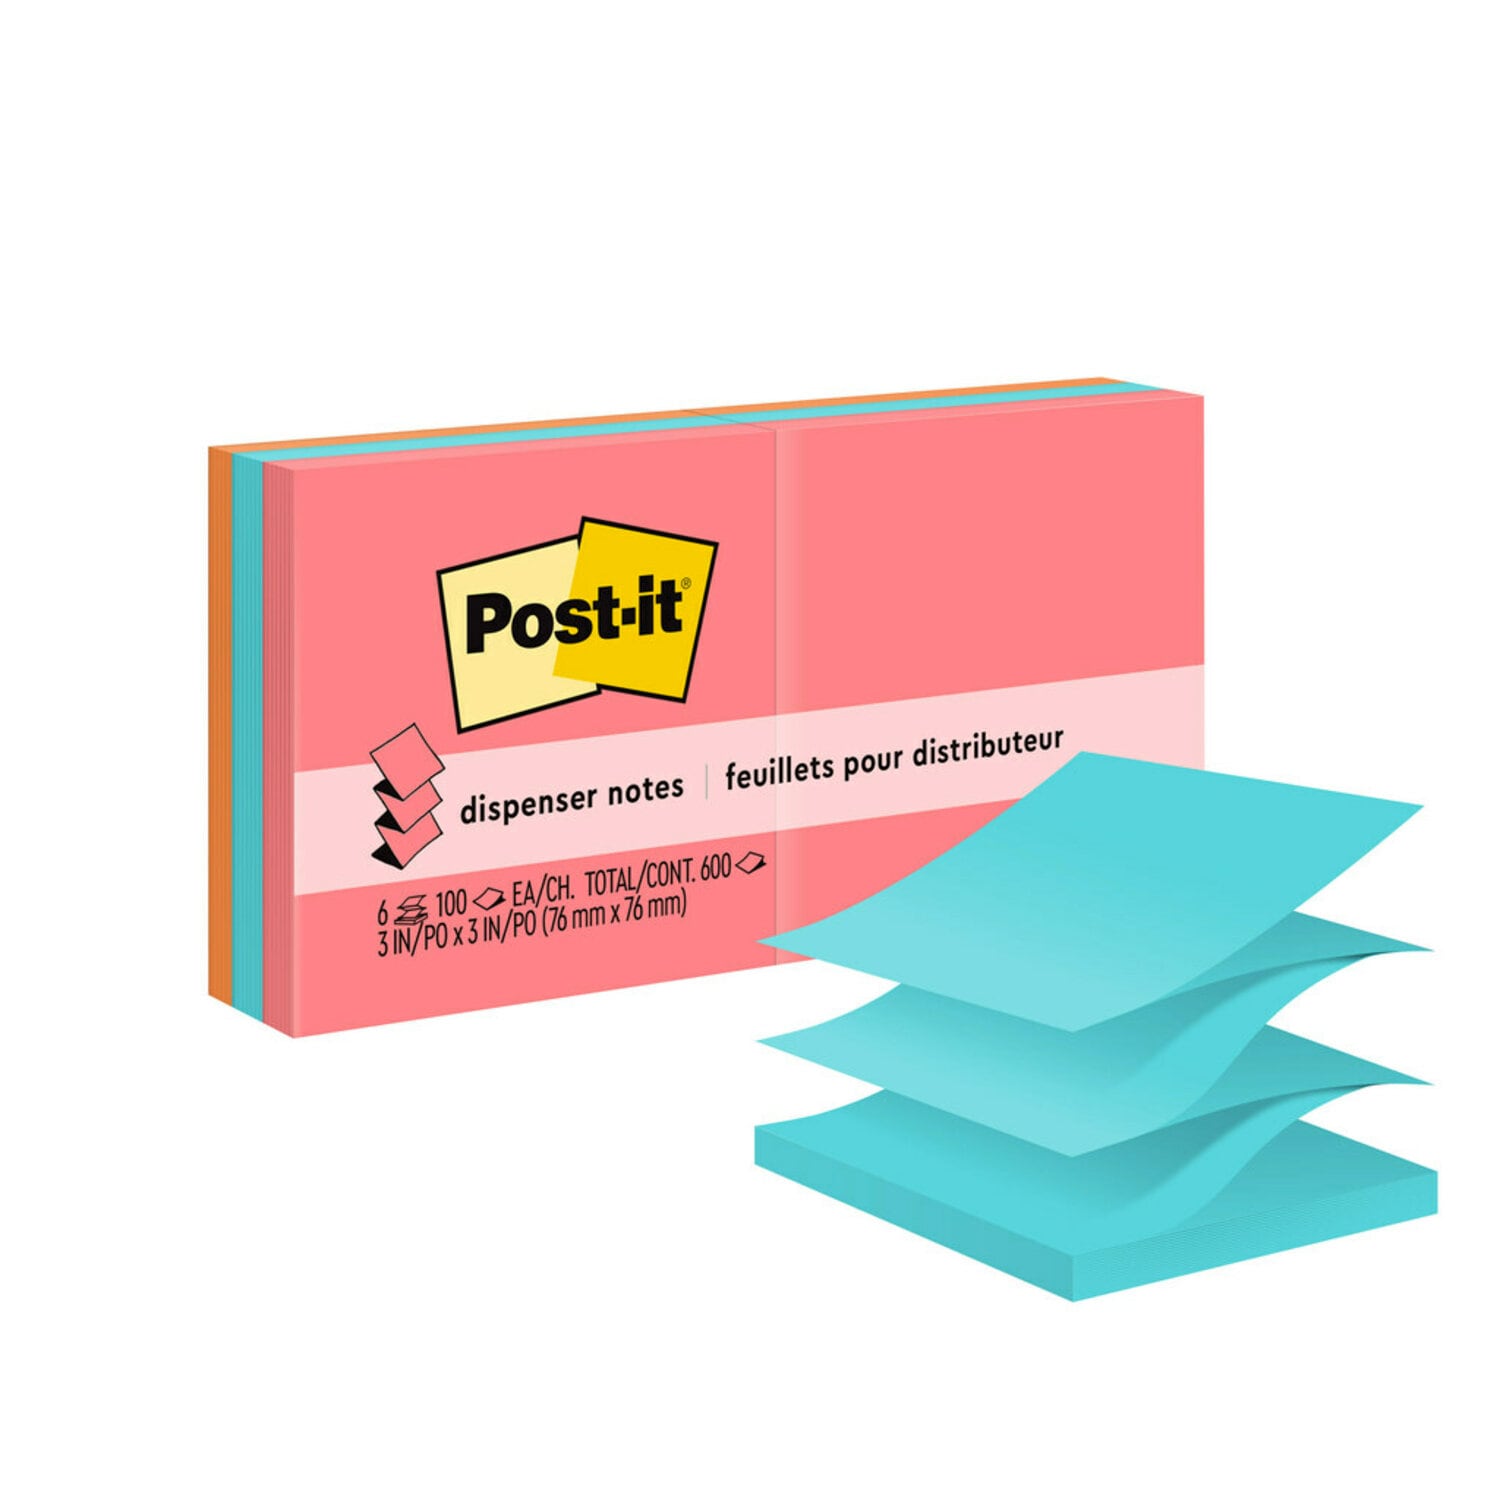 7100045754 - Post-it Pop-up Notes R330-AN, 3 in x 3 in (76 mm x 76 mm) Cape Town
Collection